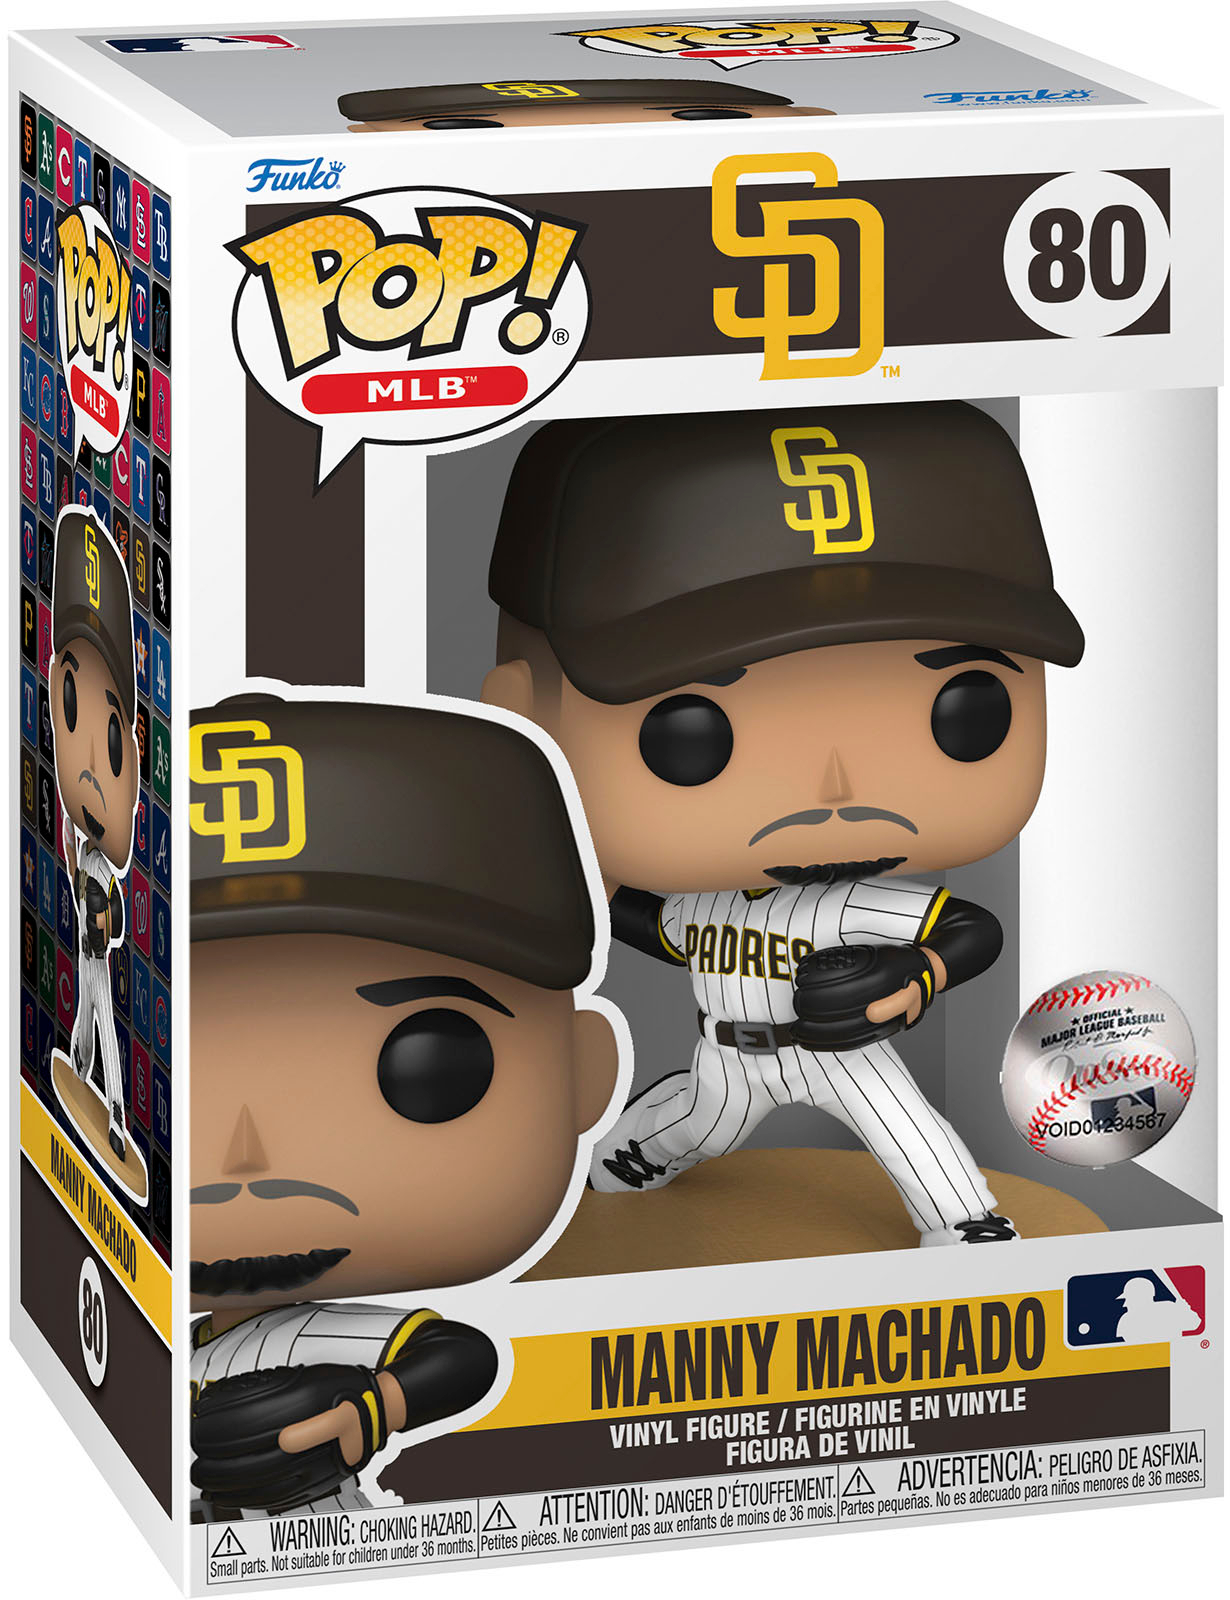 2 For $20 Manny Machado Funko Pop MLB Padres for Sale in San